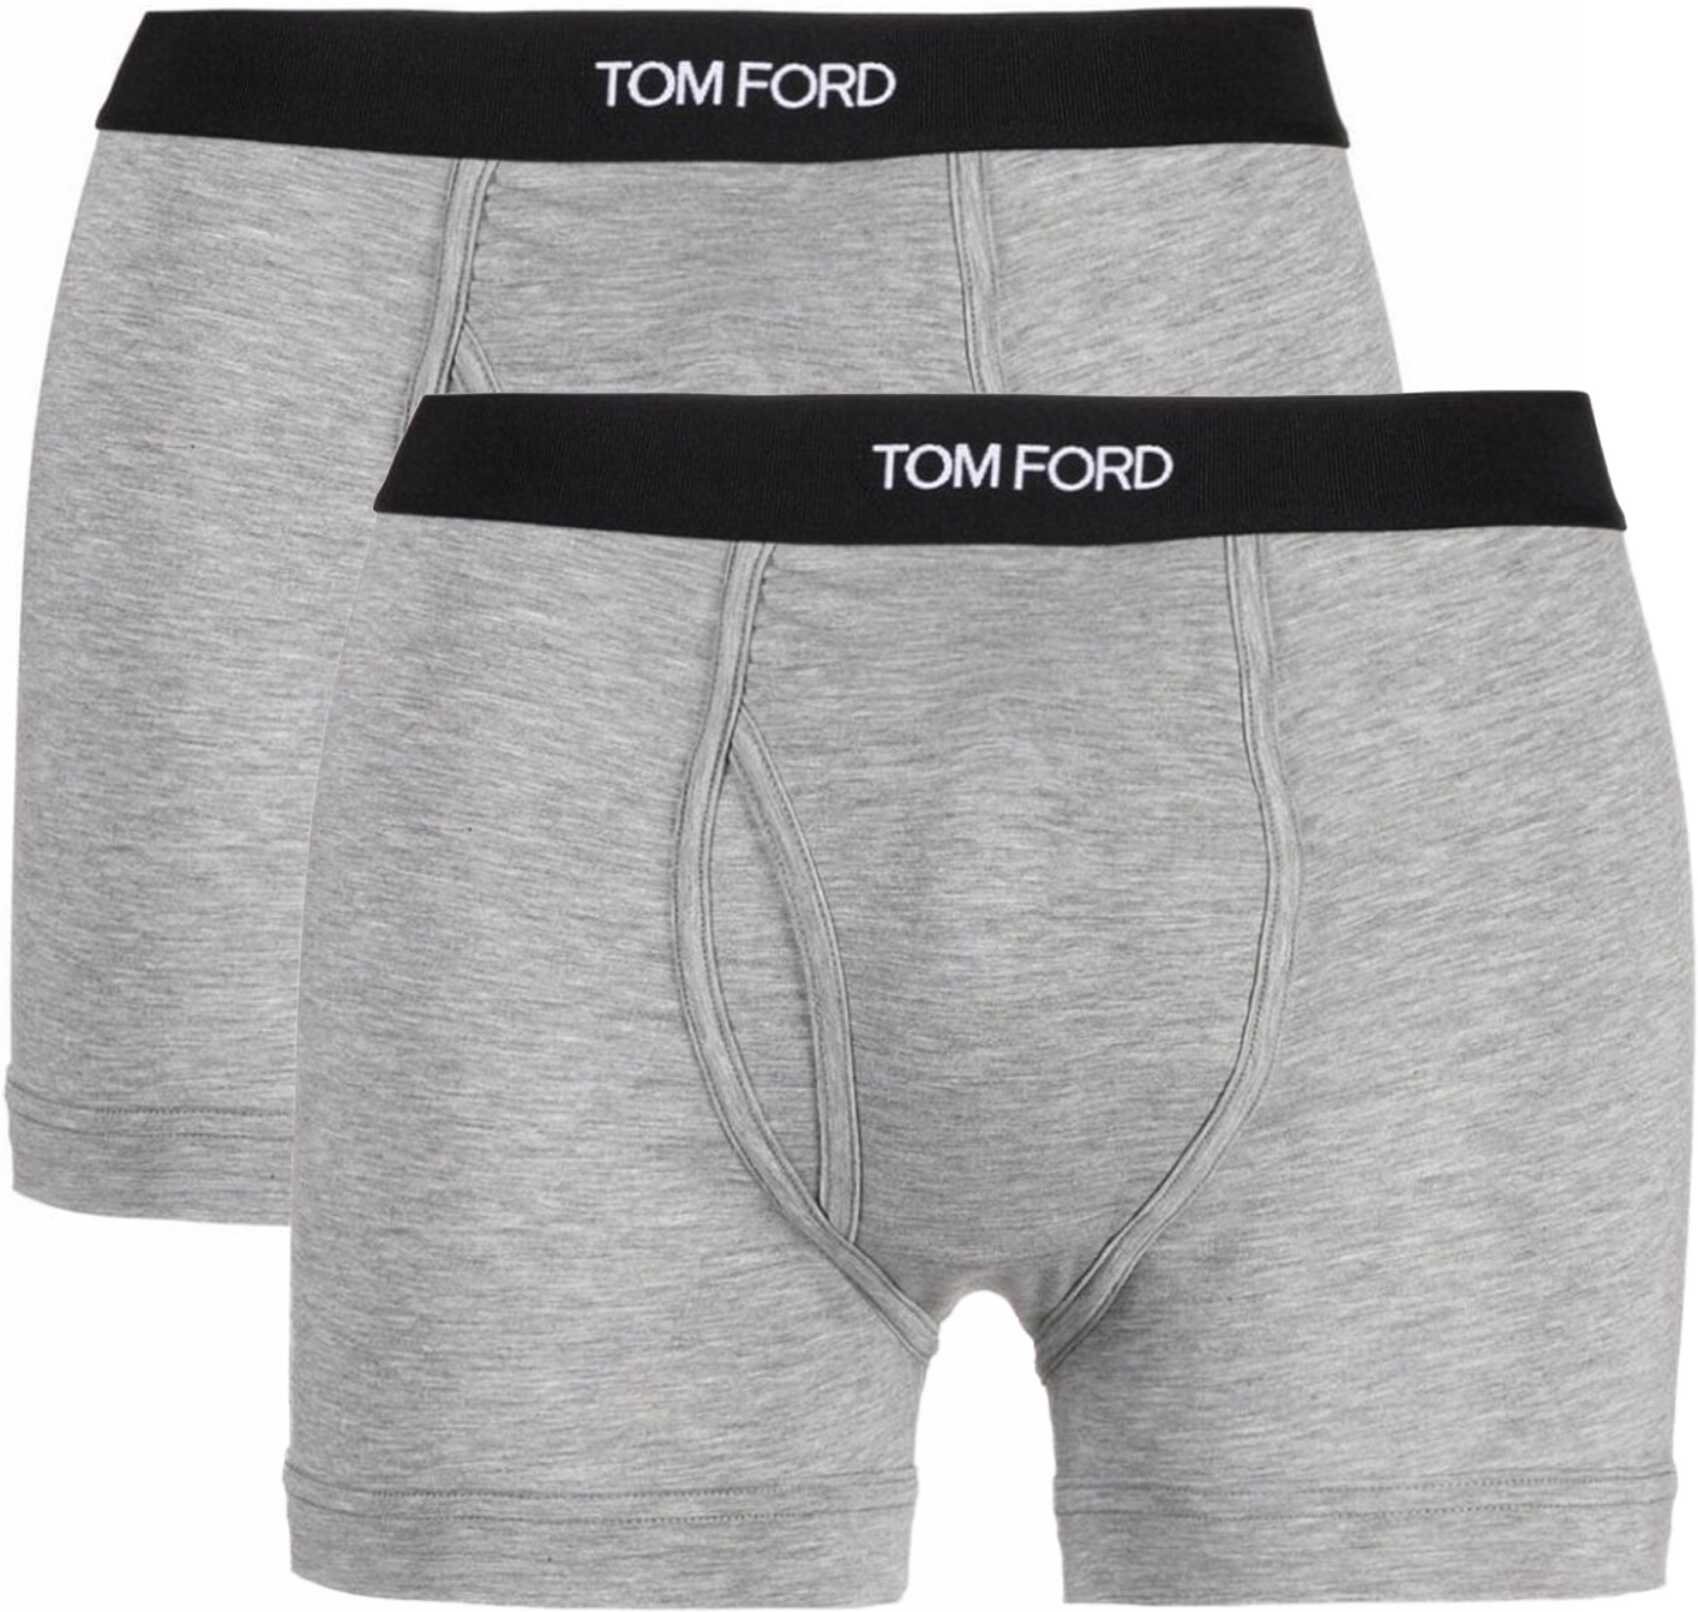 Tom Ford Confection Of Two Boxers GREY